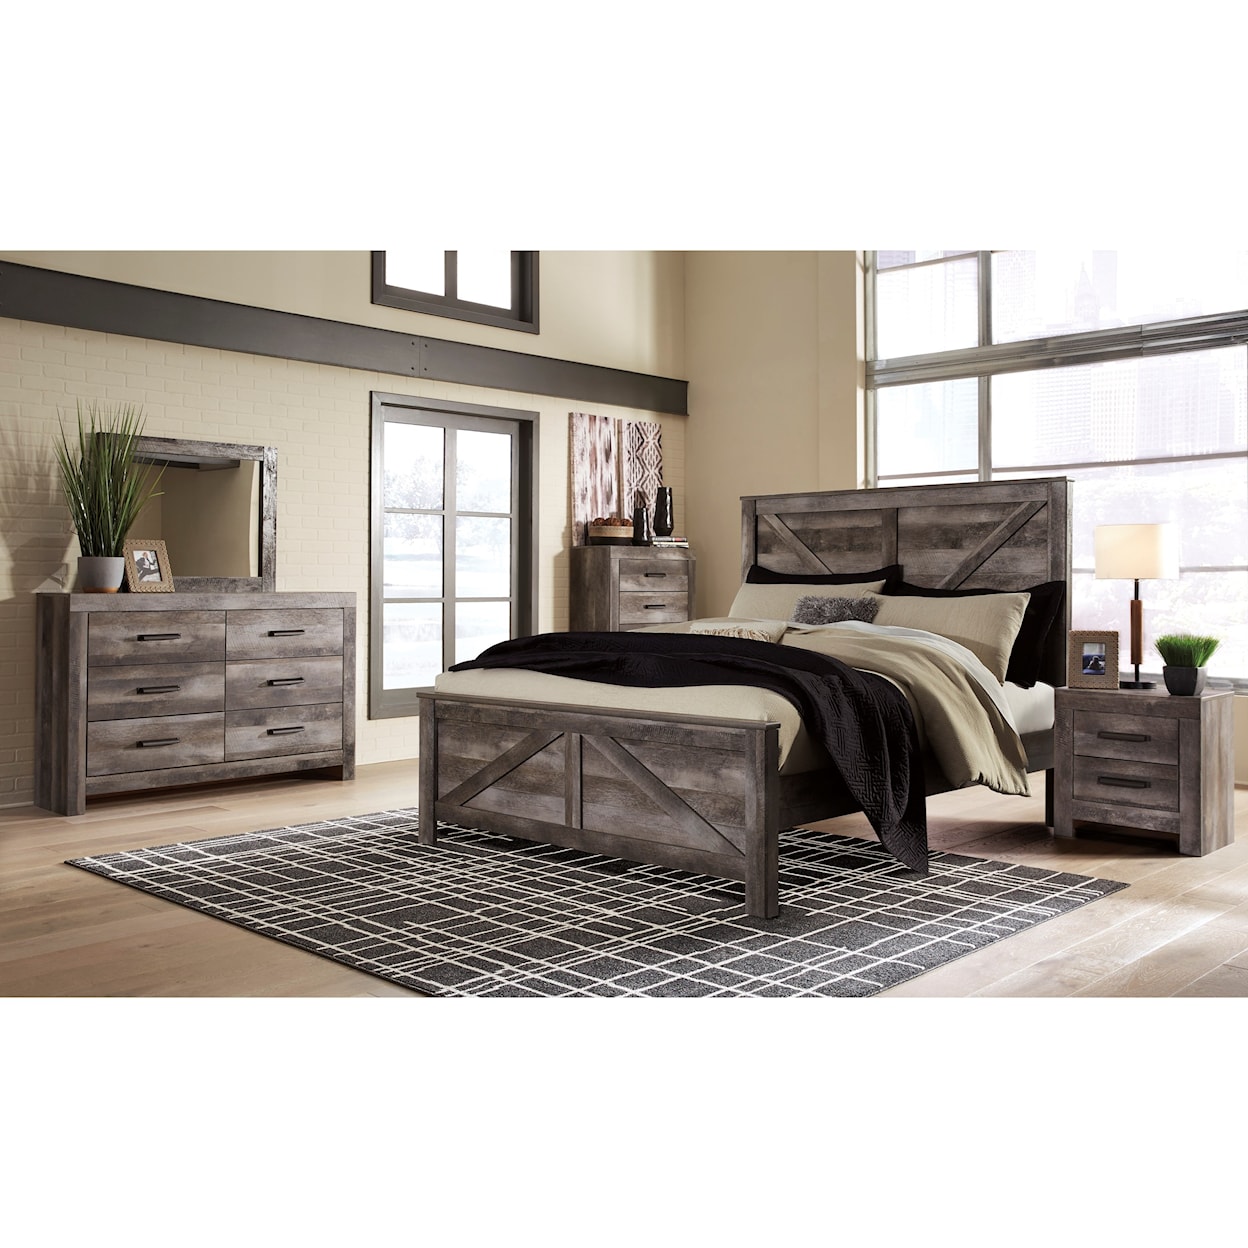 Signature Design Wynnlow King Bedroom Group